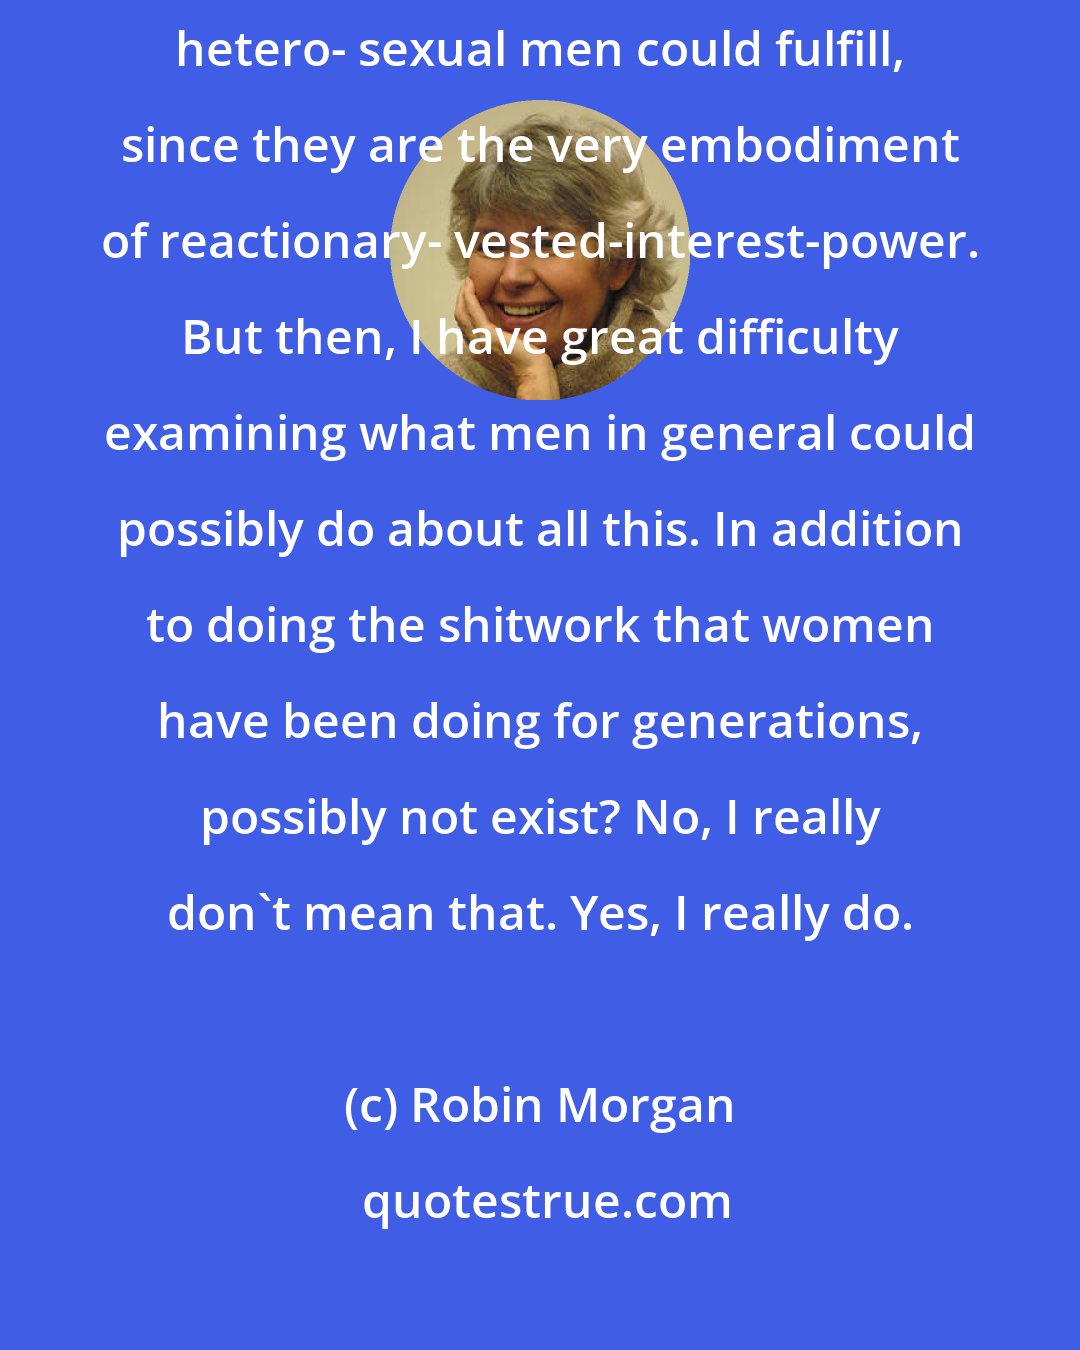 Robin Morgan: I haven't the faintest notion what possible revolutionary role white hetero- sexual men could fulfill, since they are the very embodiment of reactionary- vested-interest-power. But then, I have great difficulty examining what men in general could possibly do about all this. In addition to doing the shitwork that women have been doing for generations, possibly not exist? No, I really don't mean that. Yes, I really do.